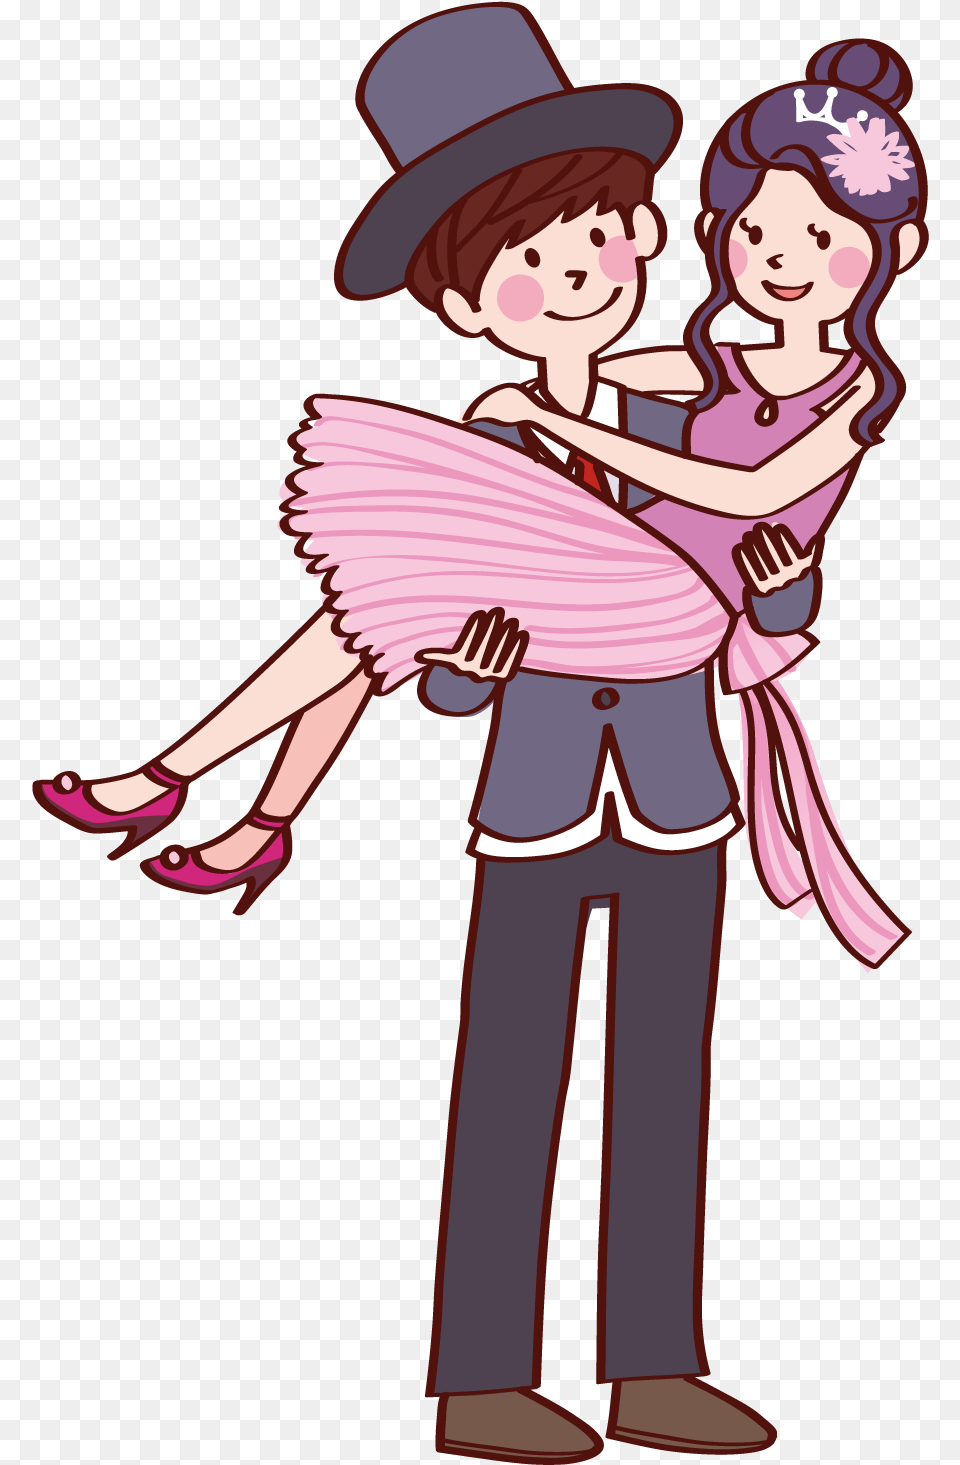 Couples Clip Fall In Love Cute Couple Image Animated Cute Love Couple Cartoon, Book, Comics, Publication, Person Free Png